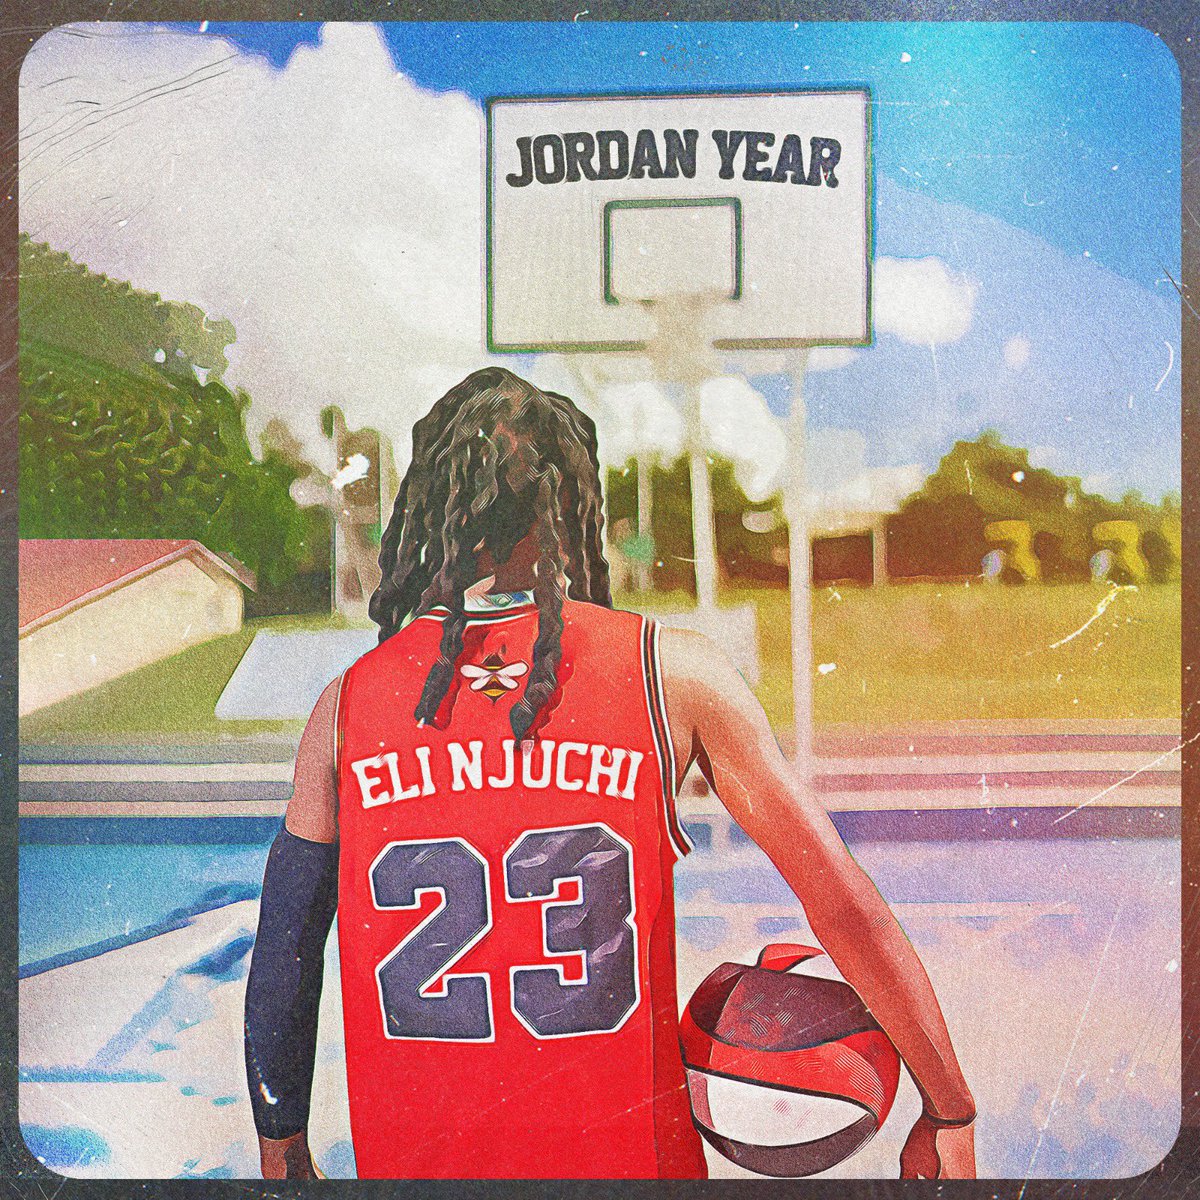 Eli Njuchi Tempolale Visualizer Go And Subscribe His YouTube Channel #JordanYear youtube.com/@officialelinj